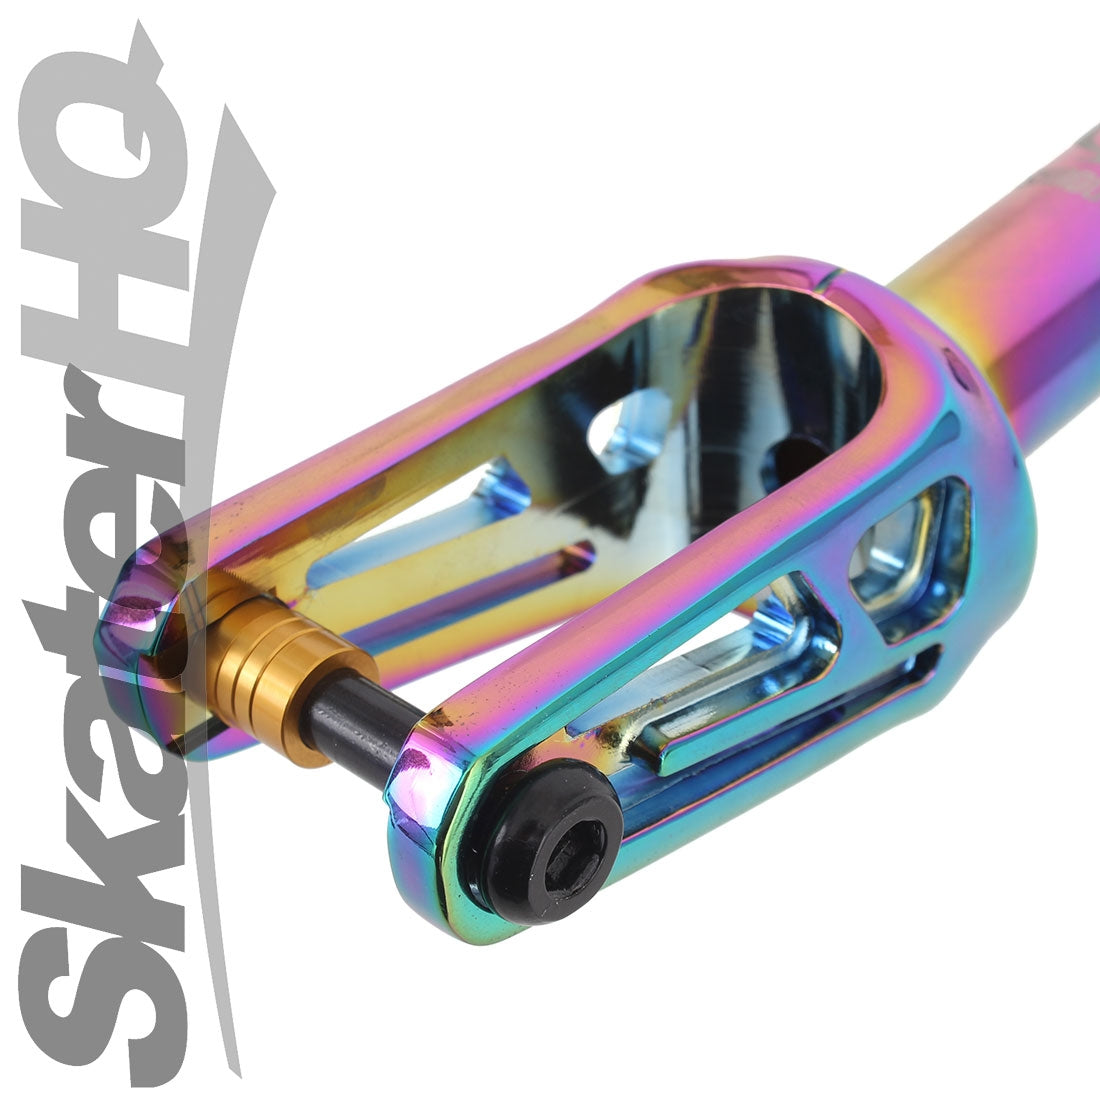 Oath Shadow IHC Fork - Neochrome Scooter Forks